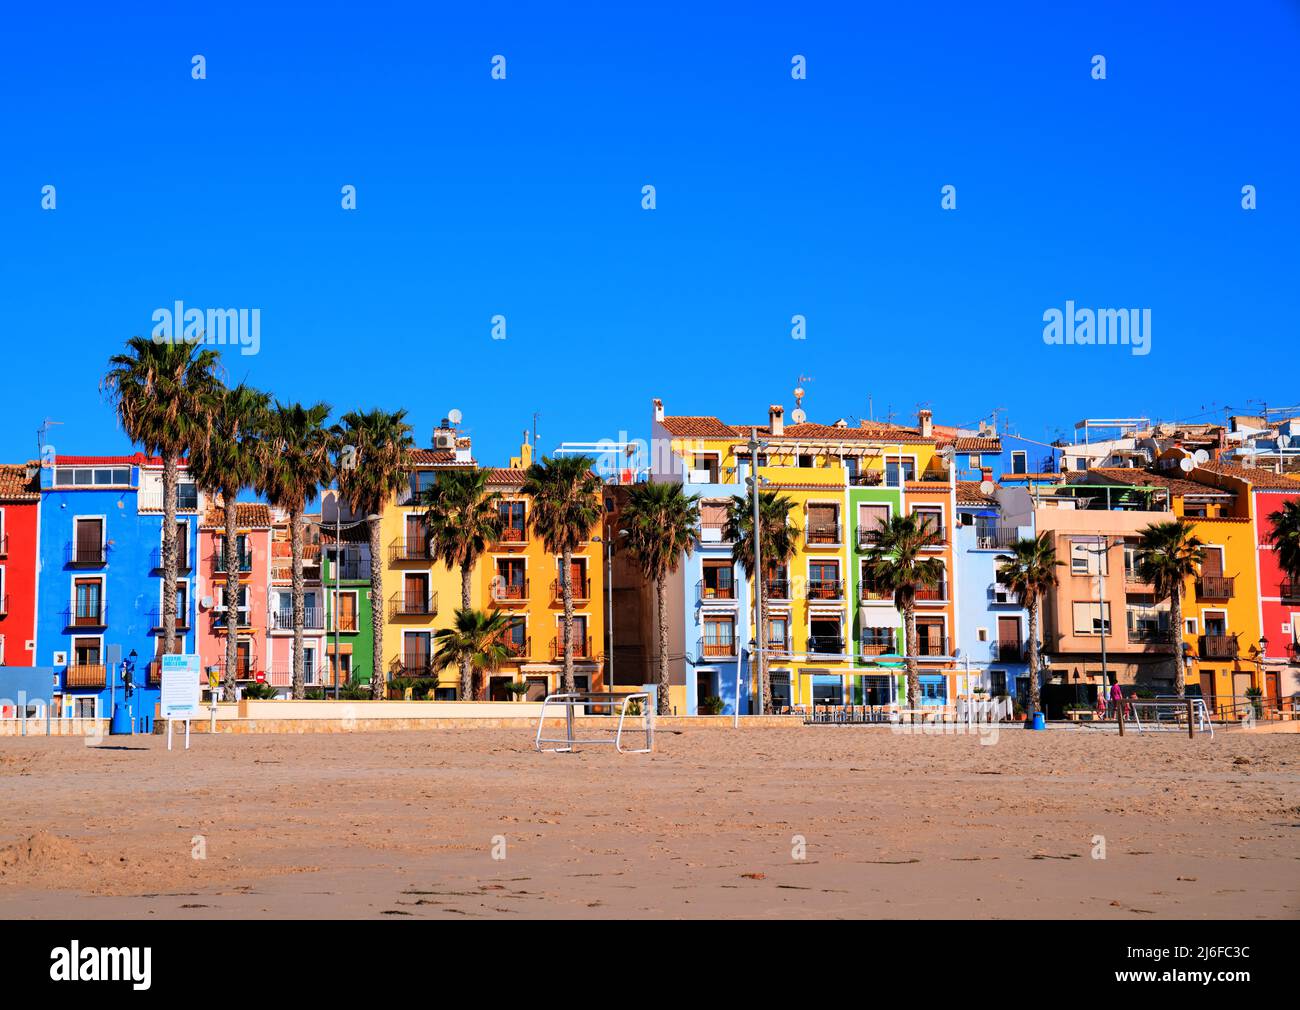 Villajoyosa Spain beautiful town with colourful houses and palm trees Costa Blanca Alicante Stock Photo